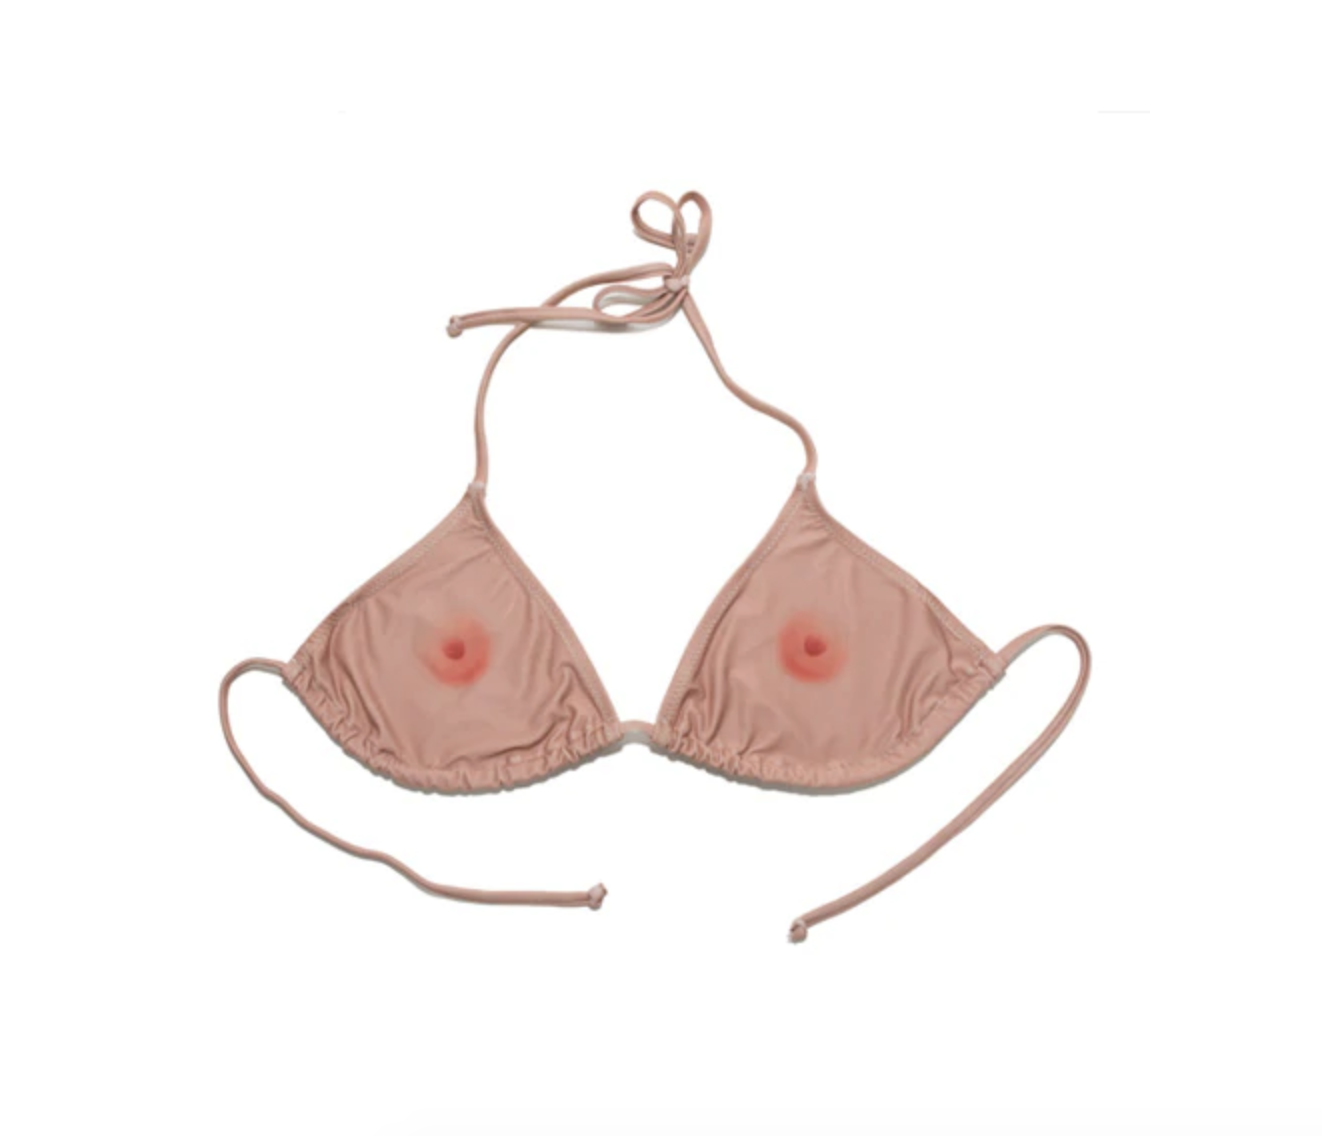 A bikini designed to resemble breasts with nipples